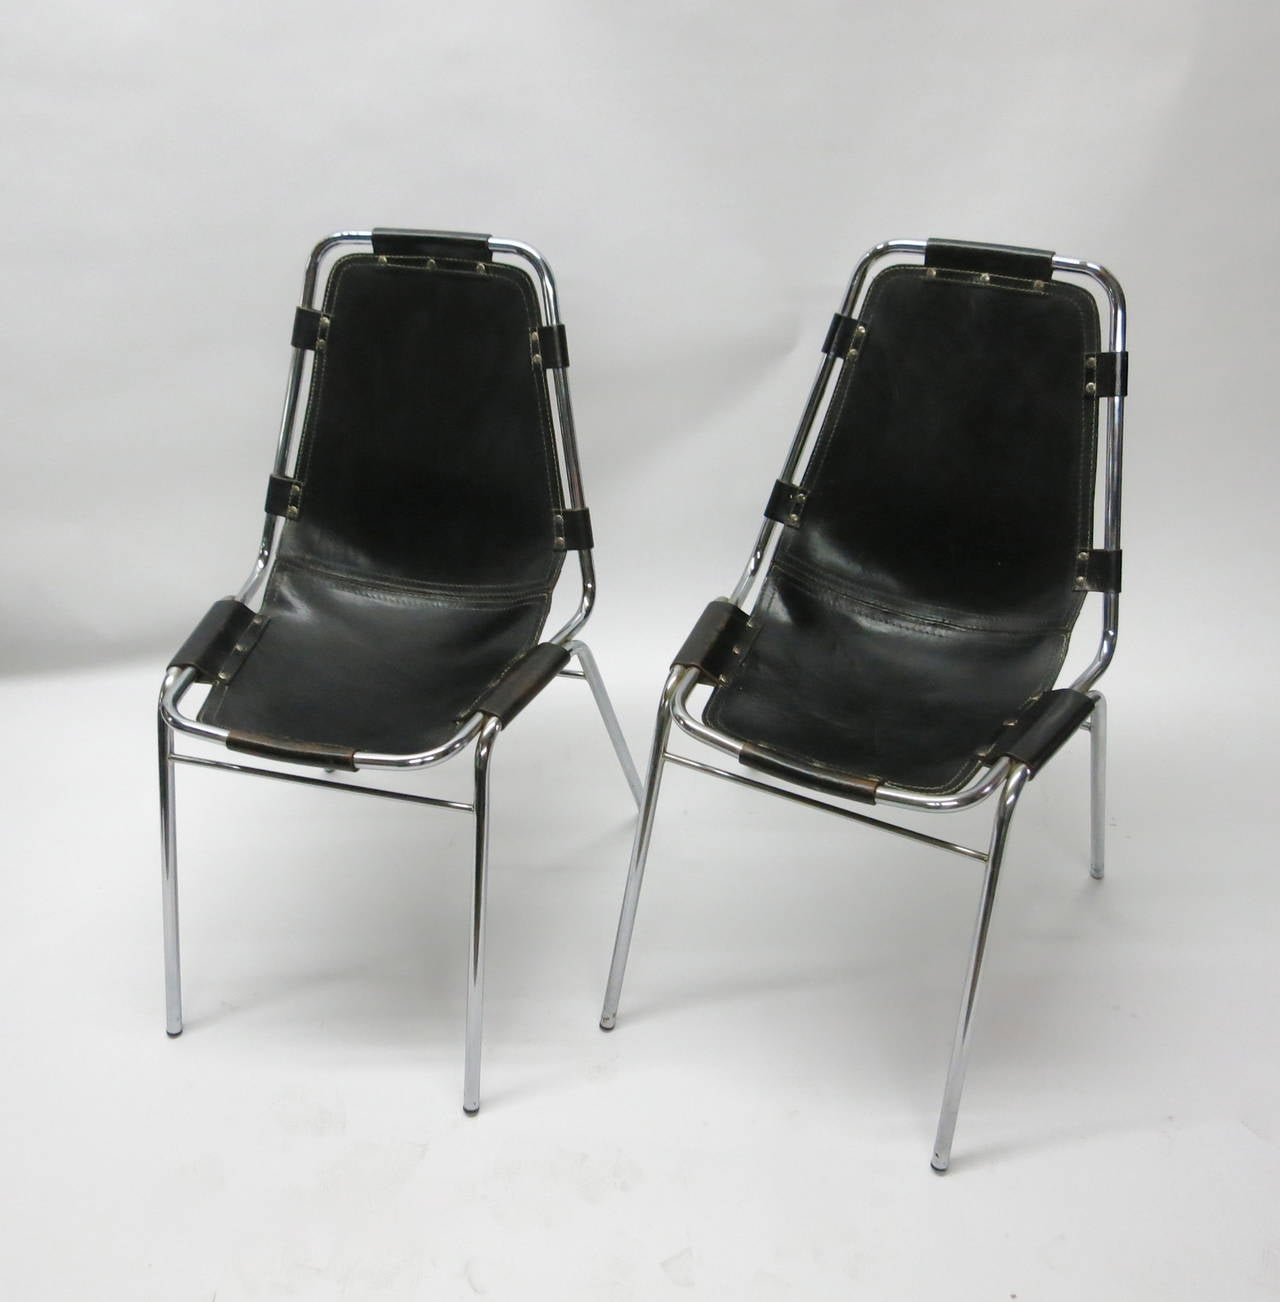 Pair of Original Chairs by Charlotte Perriand, circa 1950 Made in France 2